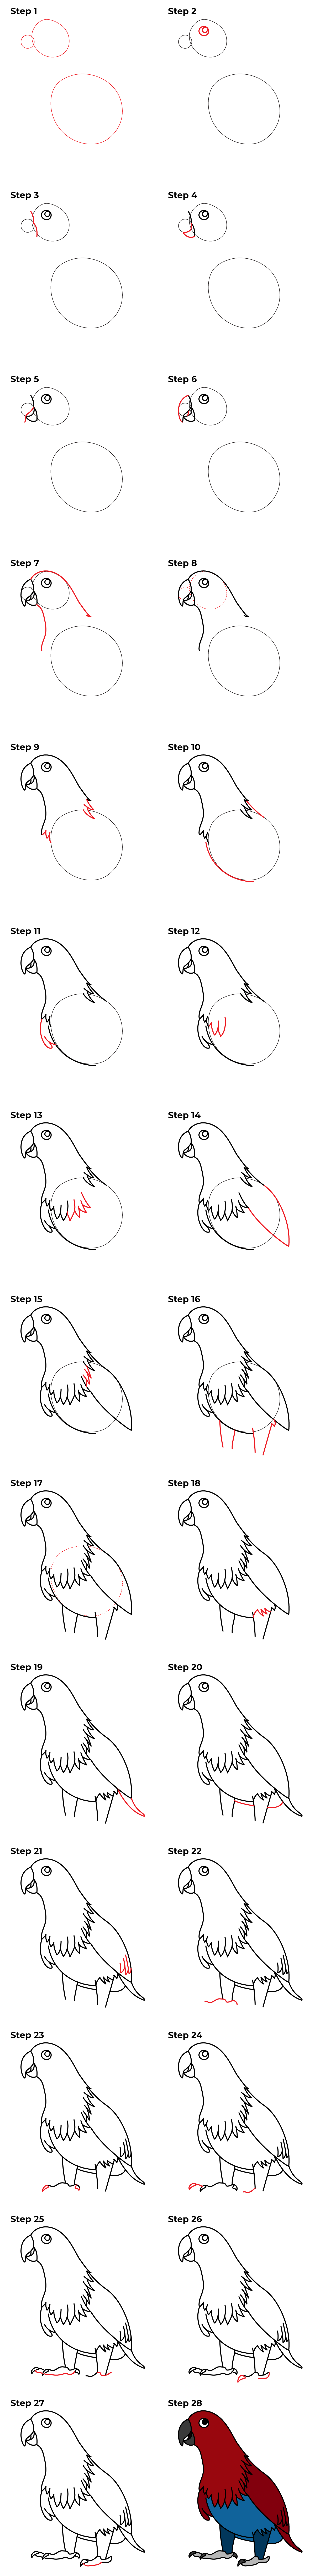 How to Draw an Eclectus Parrot - Printable Tutorial